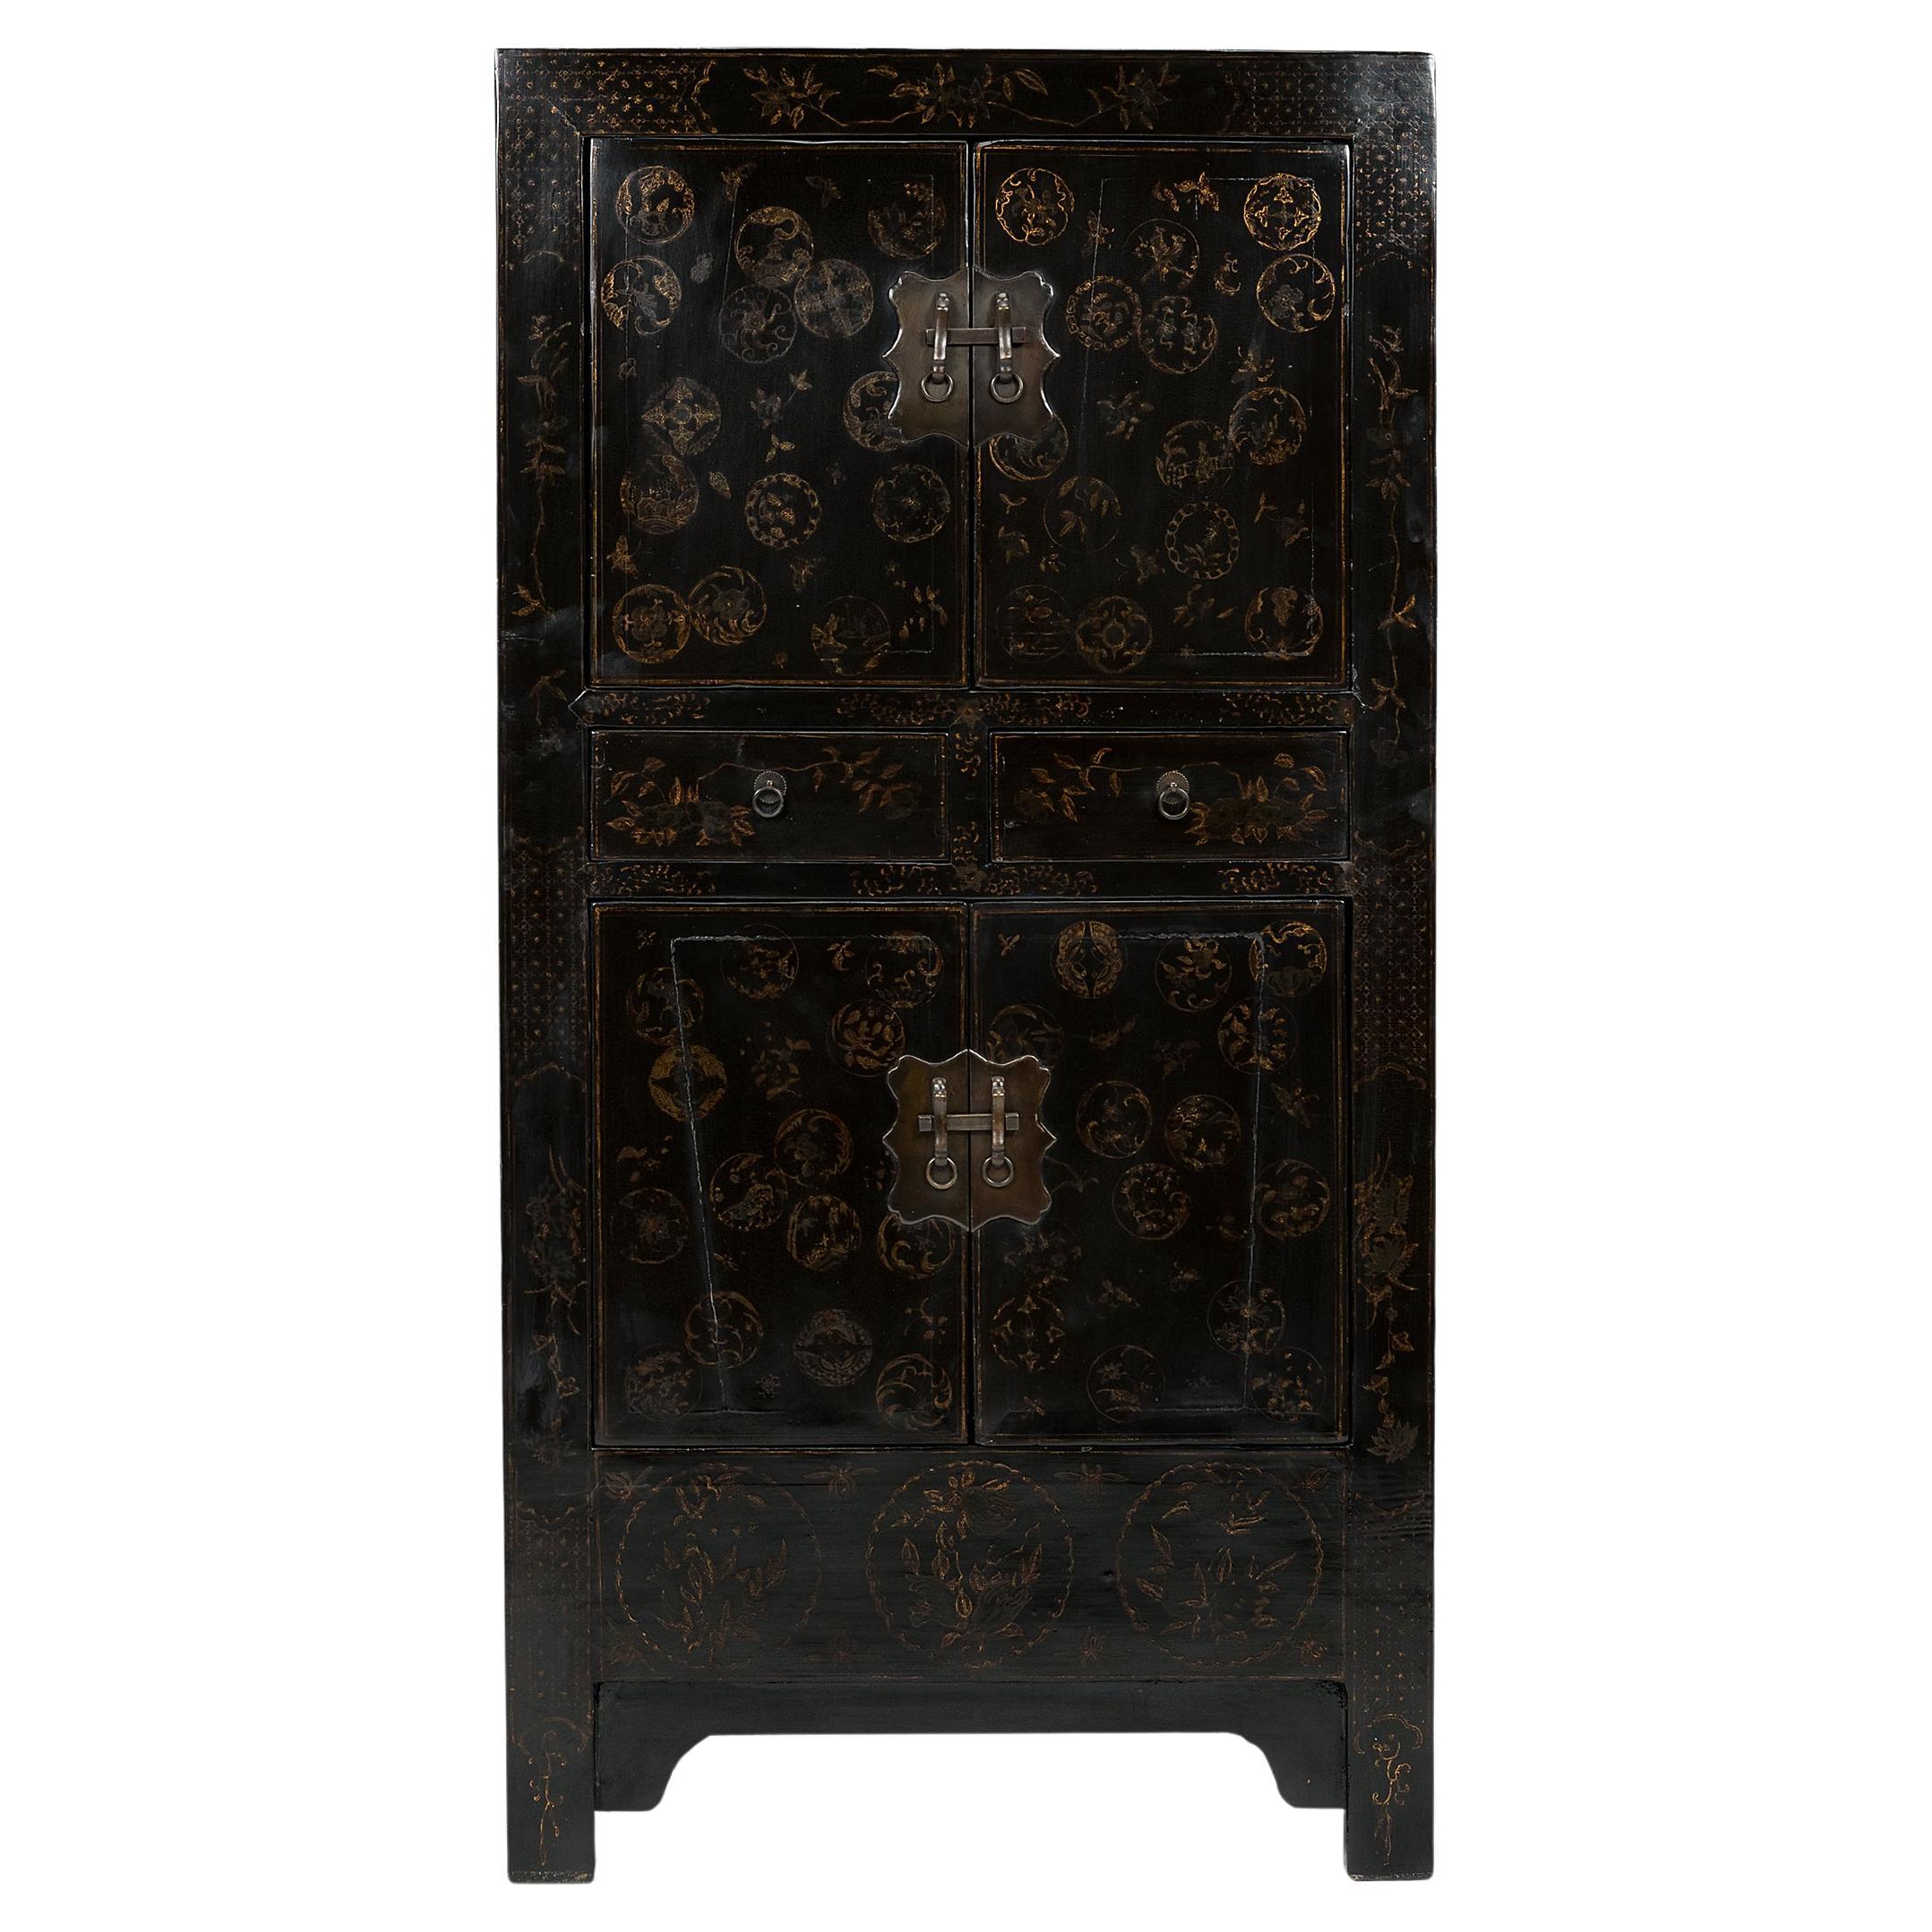 Chinese Gilt Black Lacquer Shanxi Cabinet, c. 1850